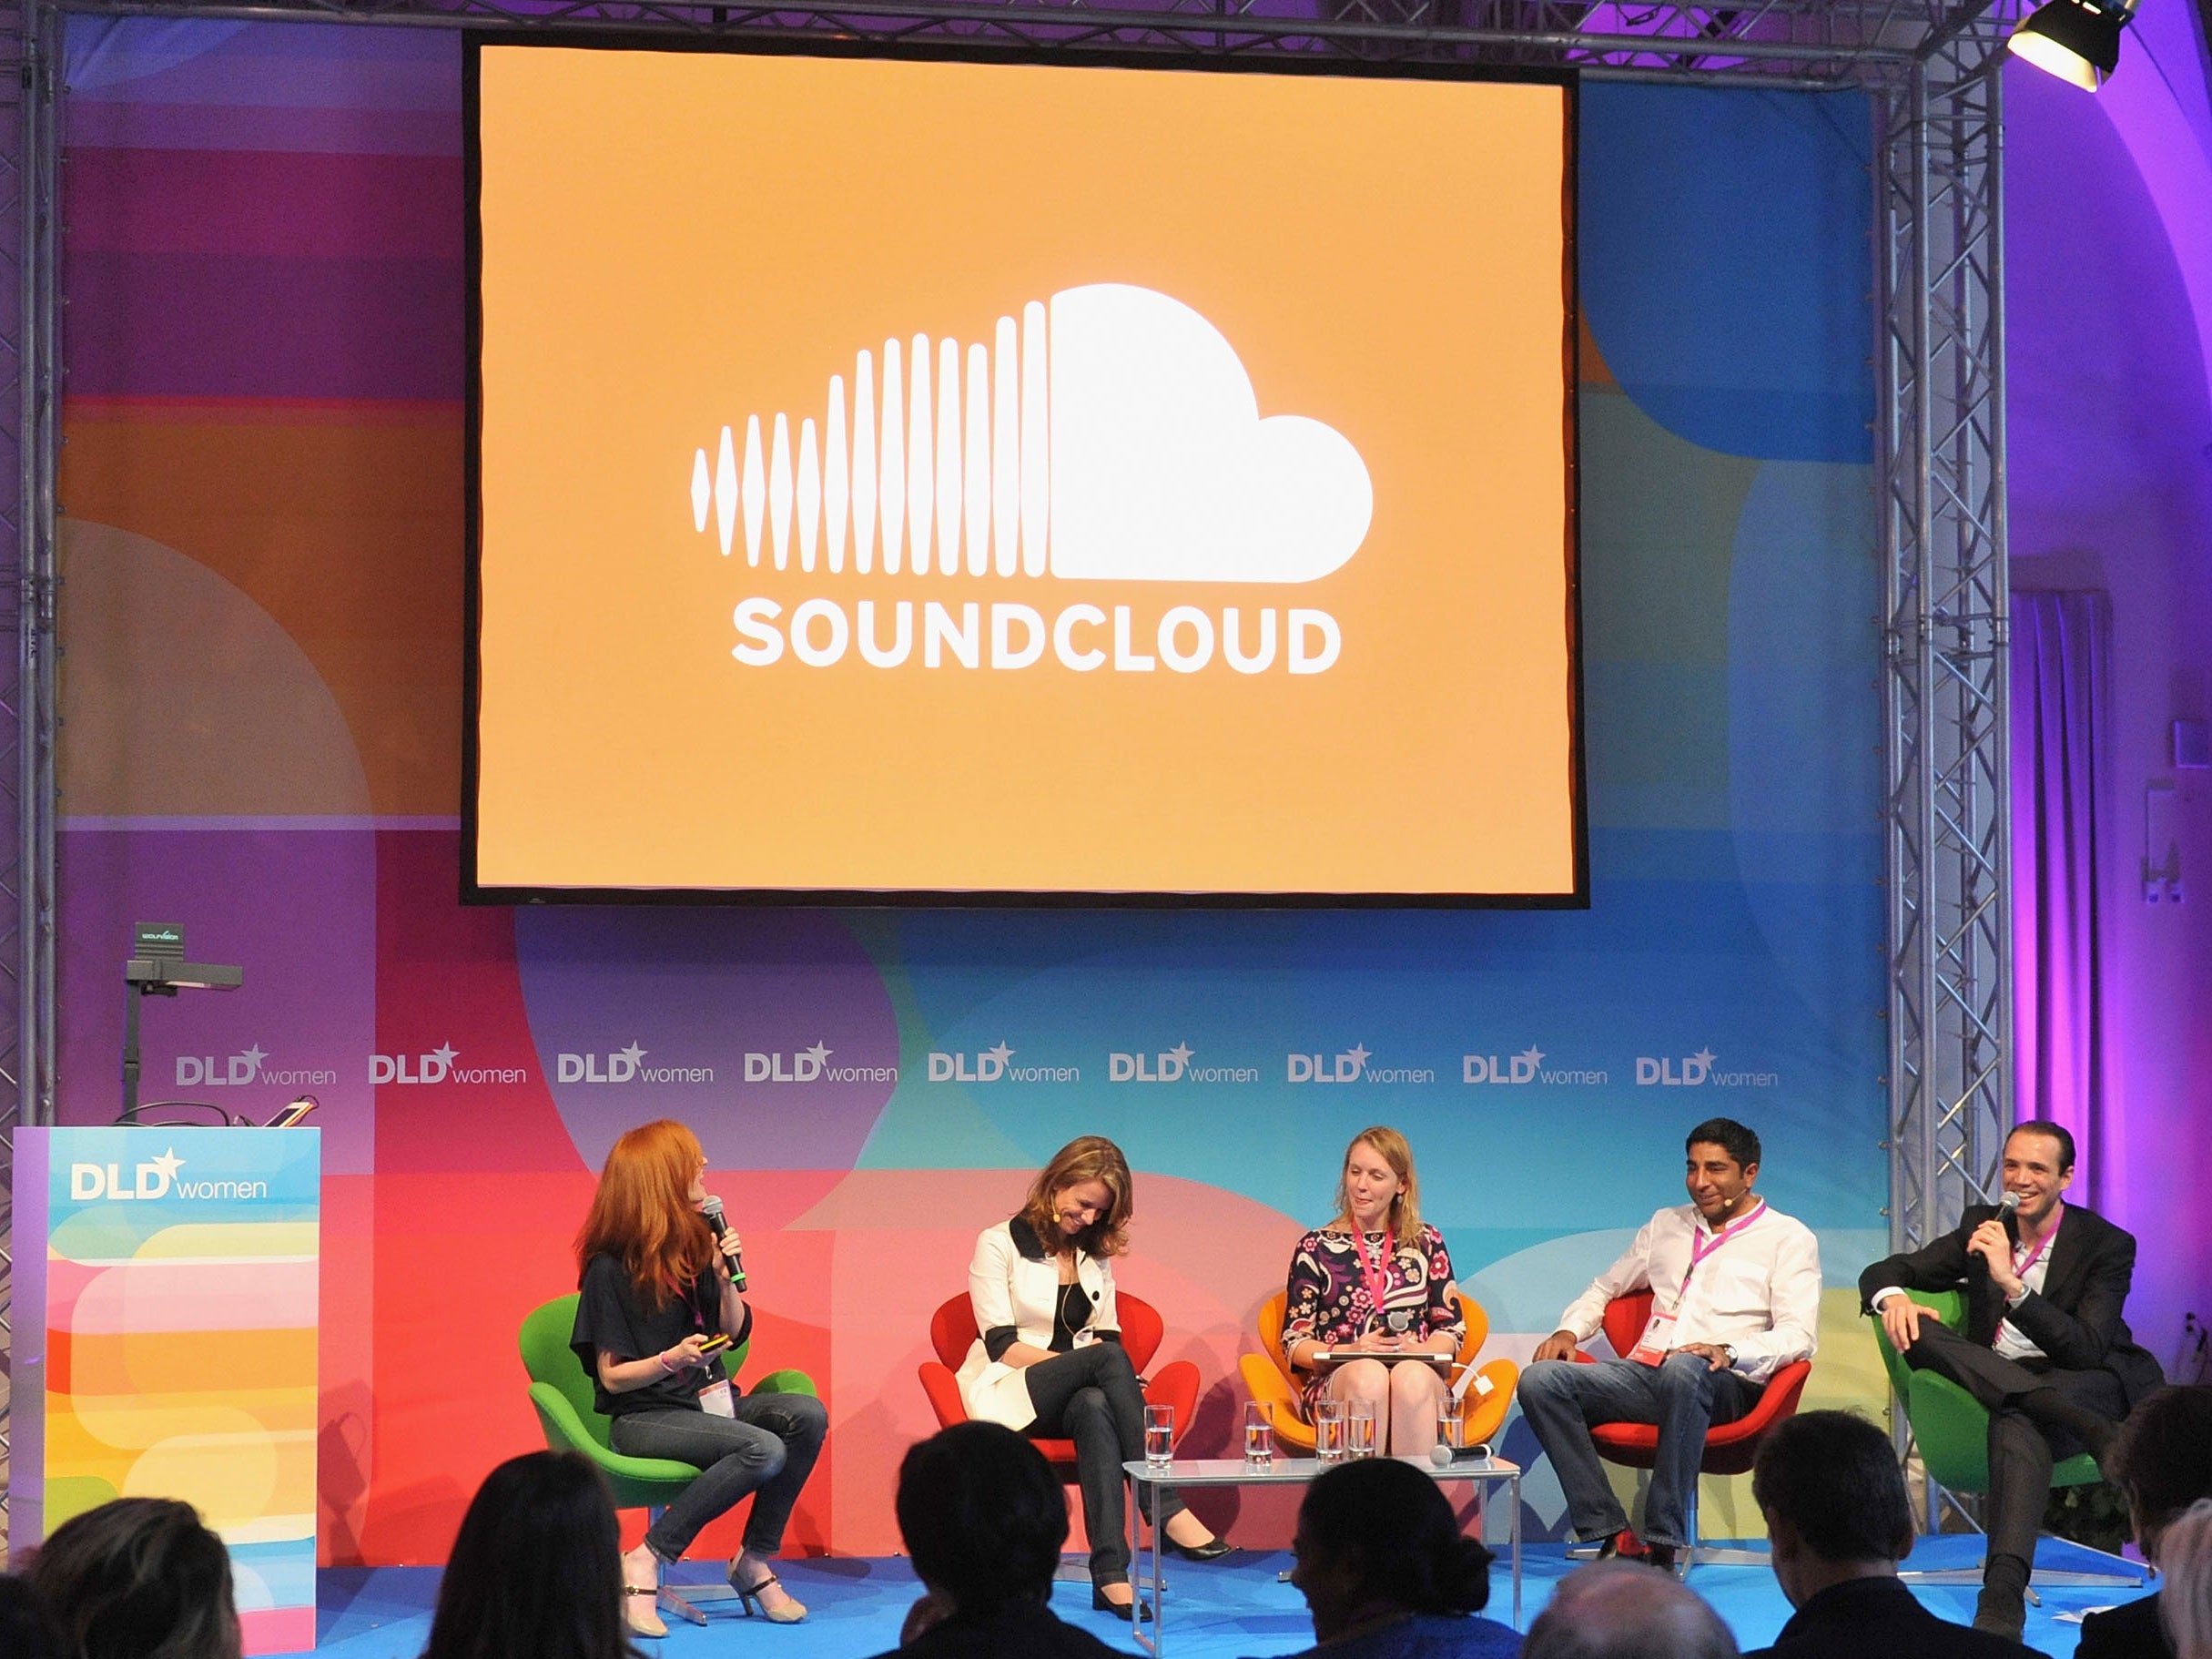 Panelists discuss Soundcloud at the Digital Life Design conference in 2011